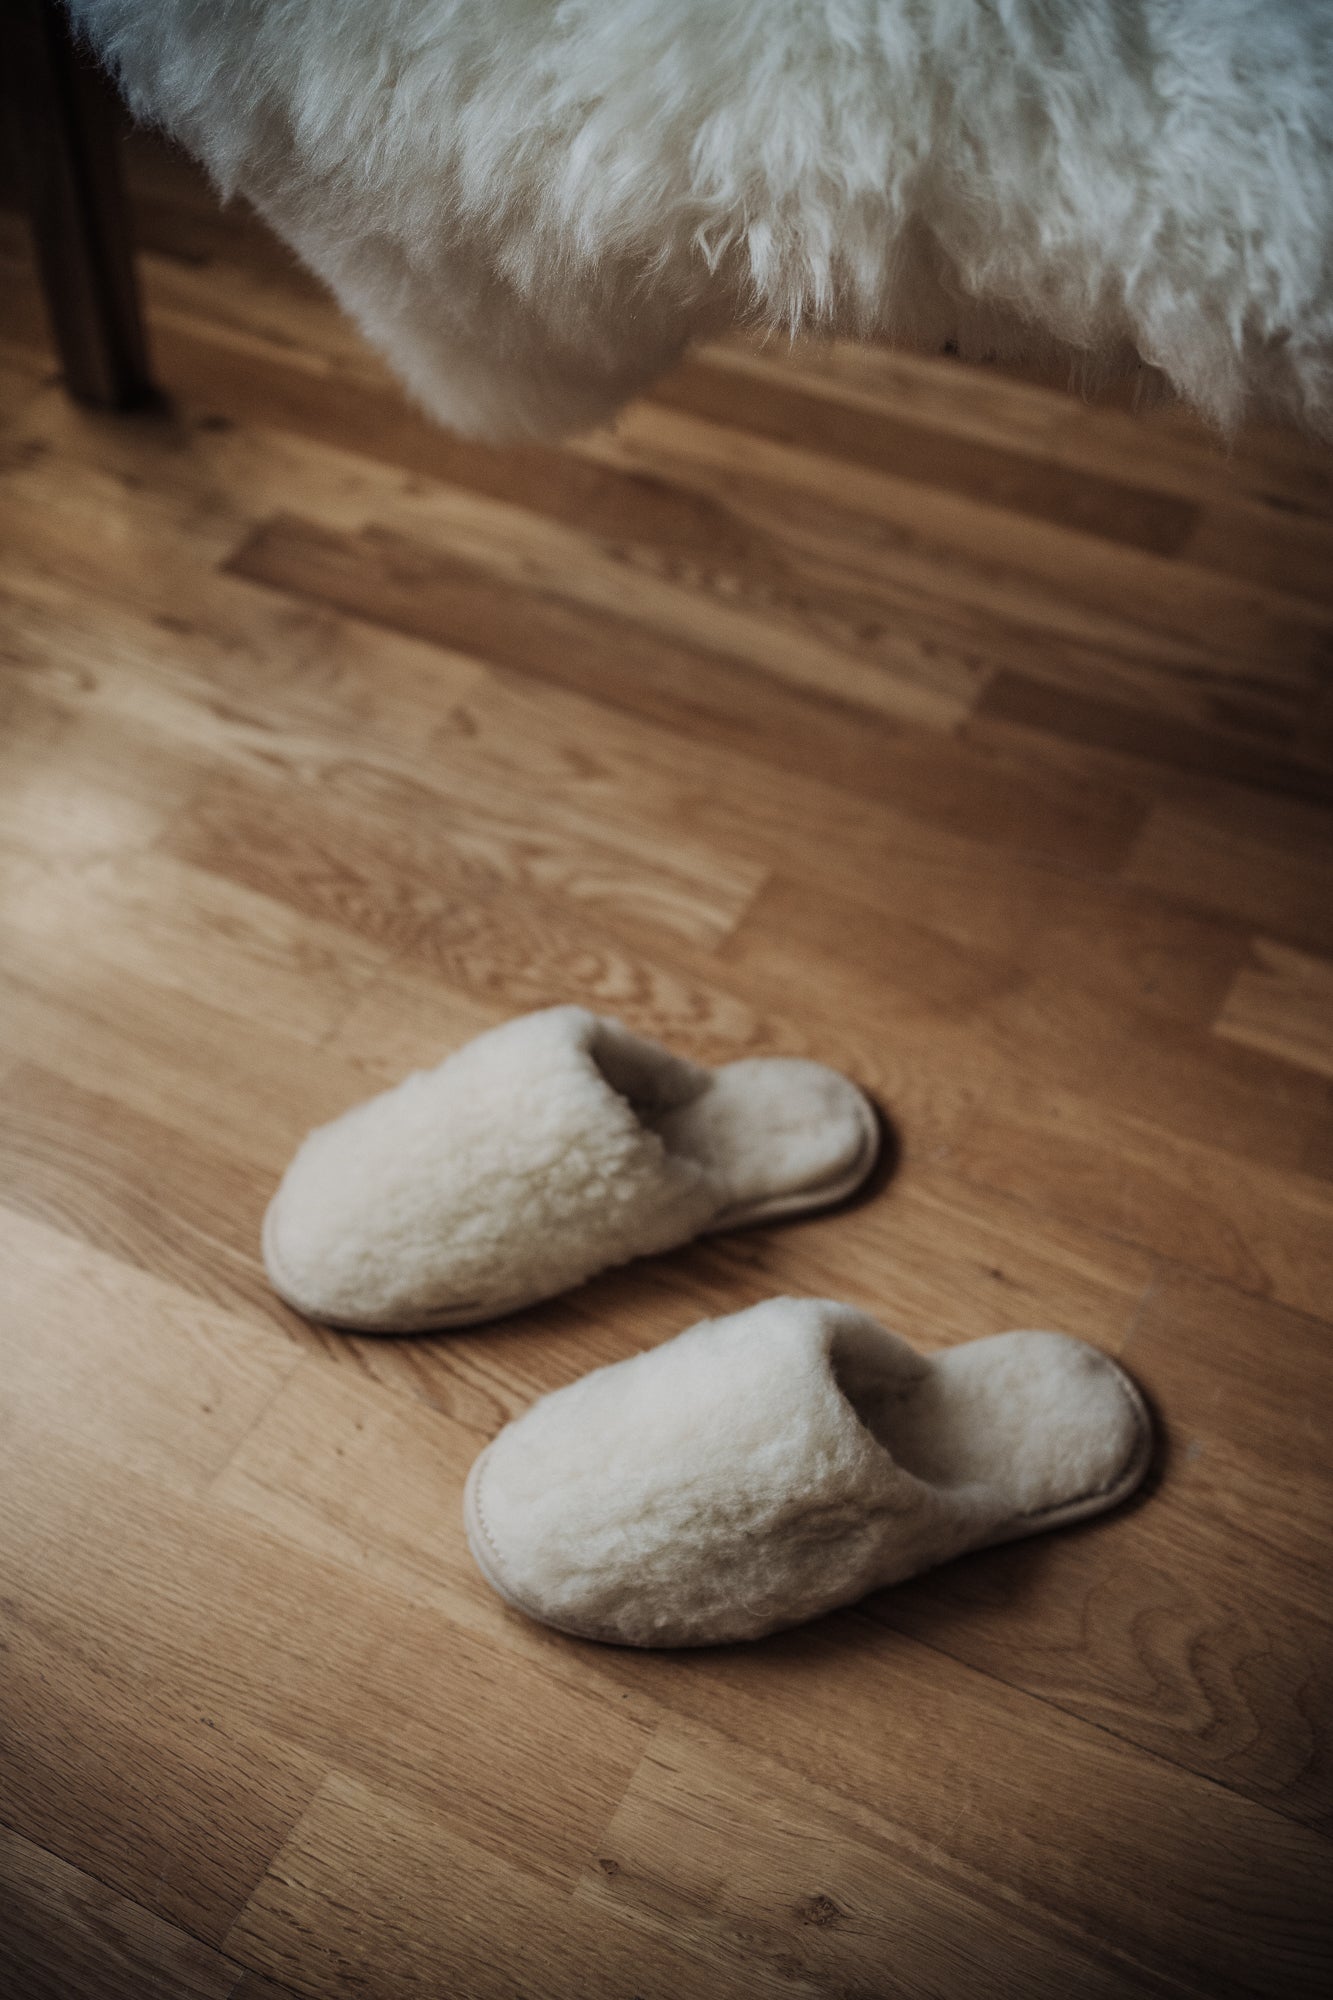 slip-on slippers, crem wool slippers, women's footwear, house shoes, lightweight slippers, natural fibre, rubber sole, comfortable house footwear, warm and cosy, gift for her